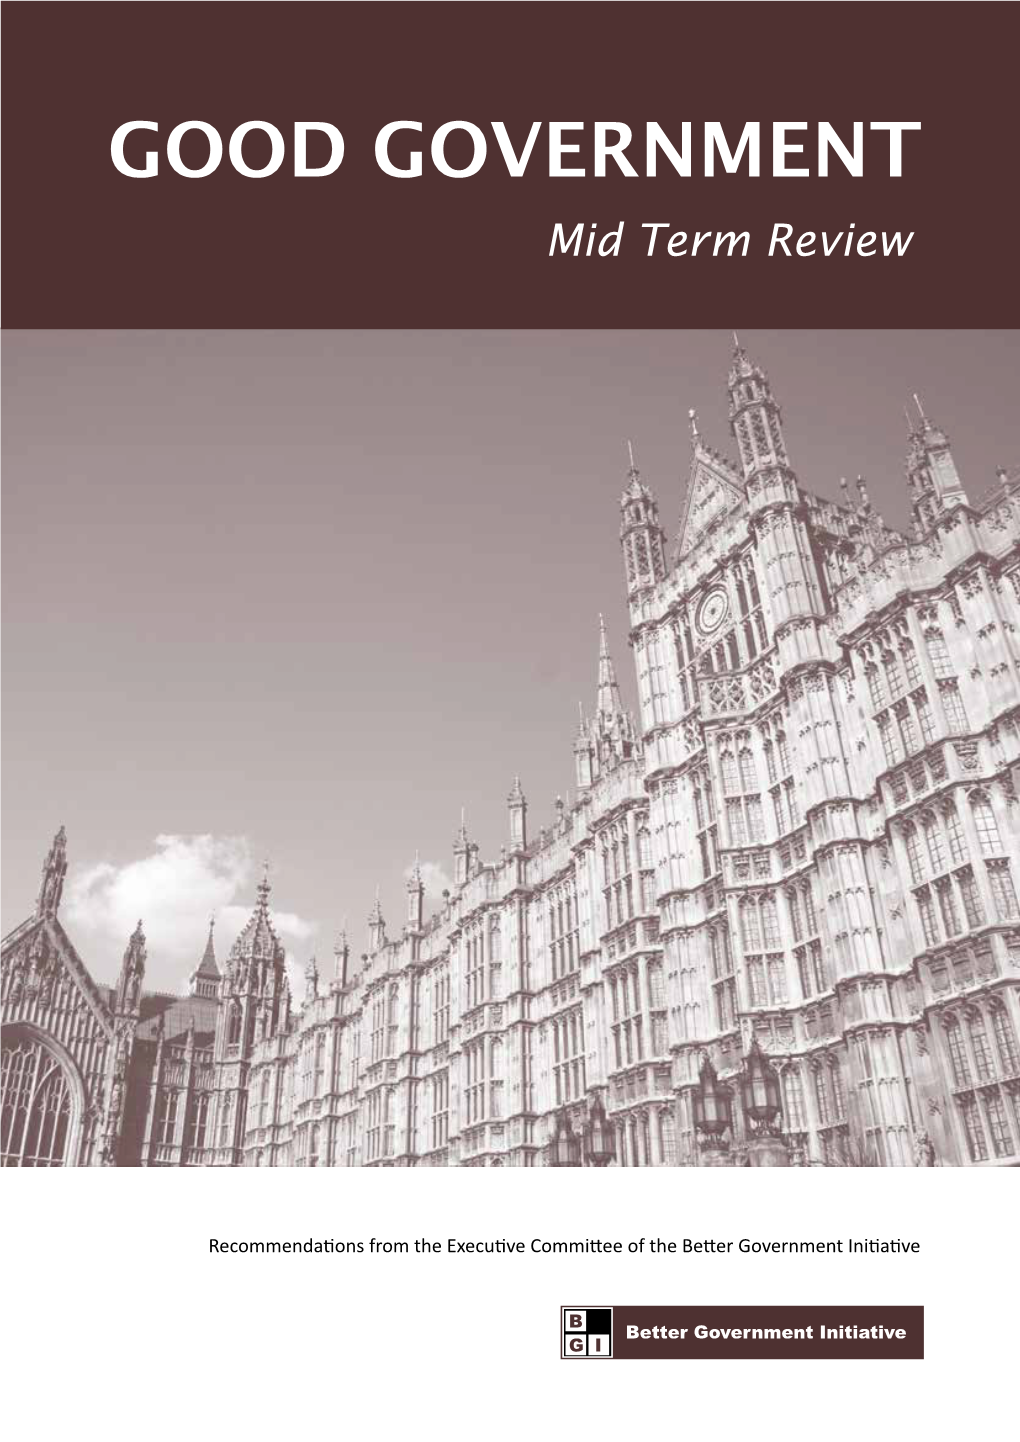 Good Government: Mid Term Review